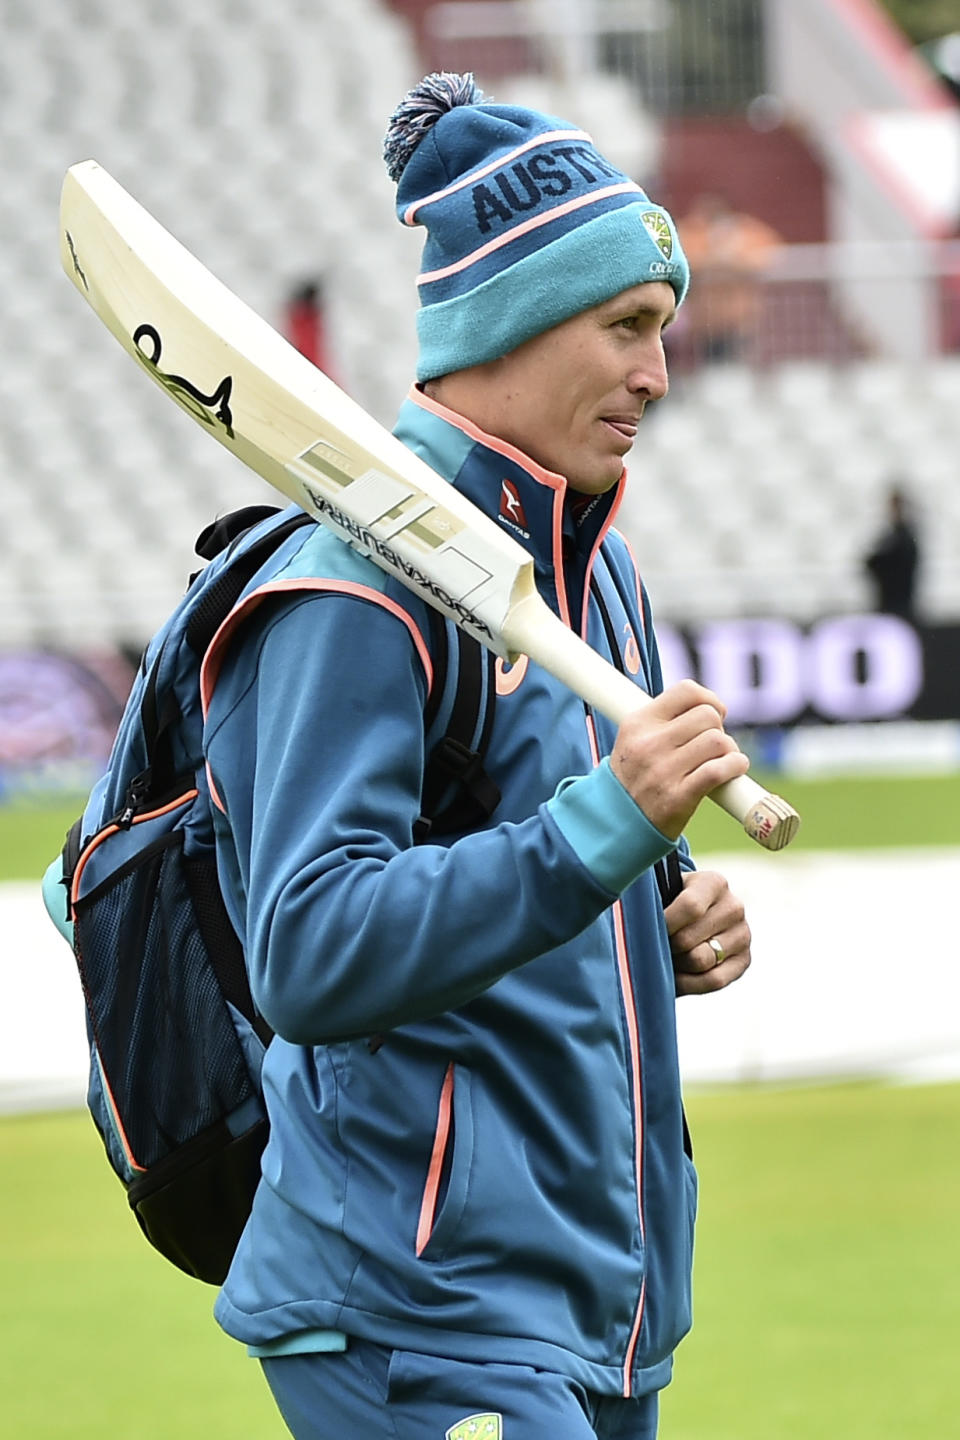 Australia's Marnus Labuschagne arrives for the fifth day of the fourth Ashes Test match between England and Australia at Old Trafford, Manchester, England, Sunday, July 23, 2023. (AP Photo/Rui Vieira)